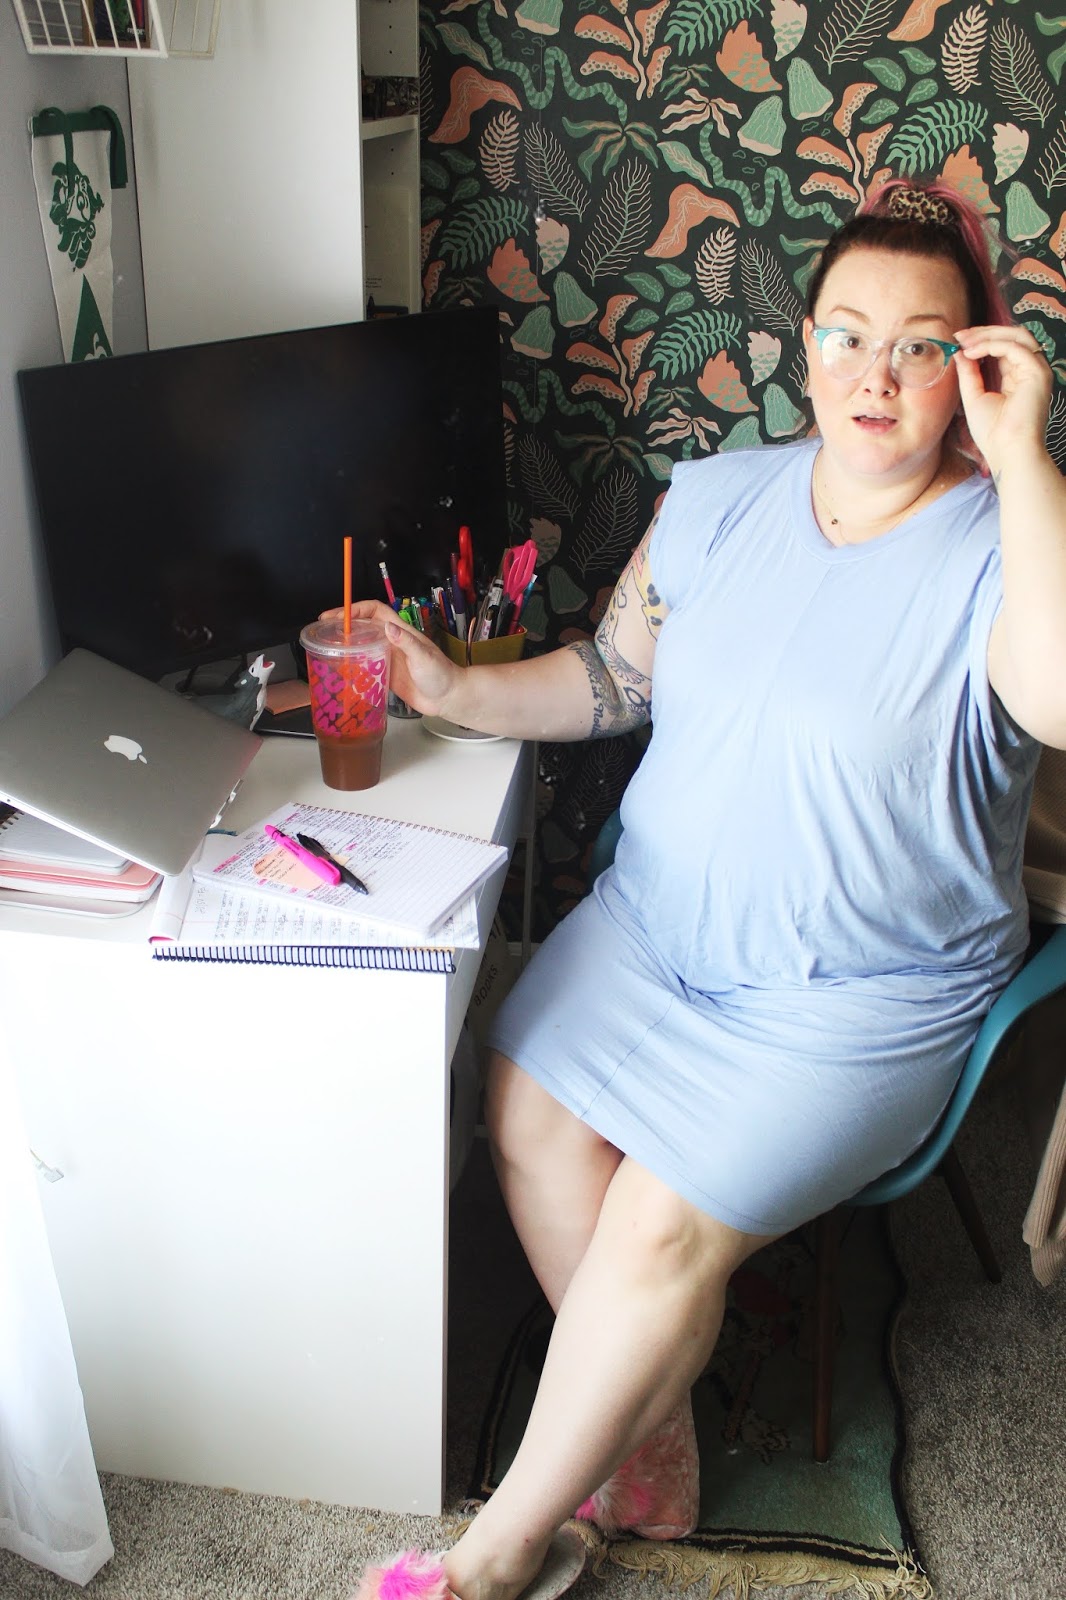 5 perfect wfh outfits, work-from-home, wfh style, wfh fashion, plus-size style, fat fashion, inclusive clothing, quarantine wardrobe